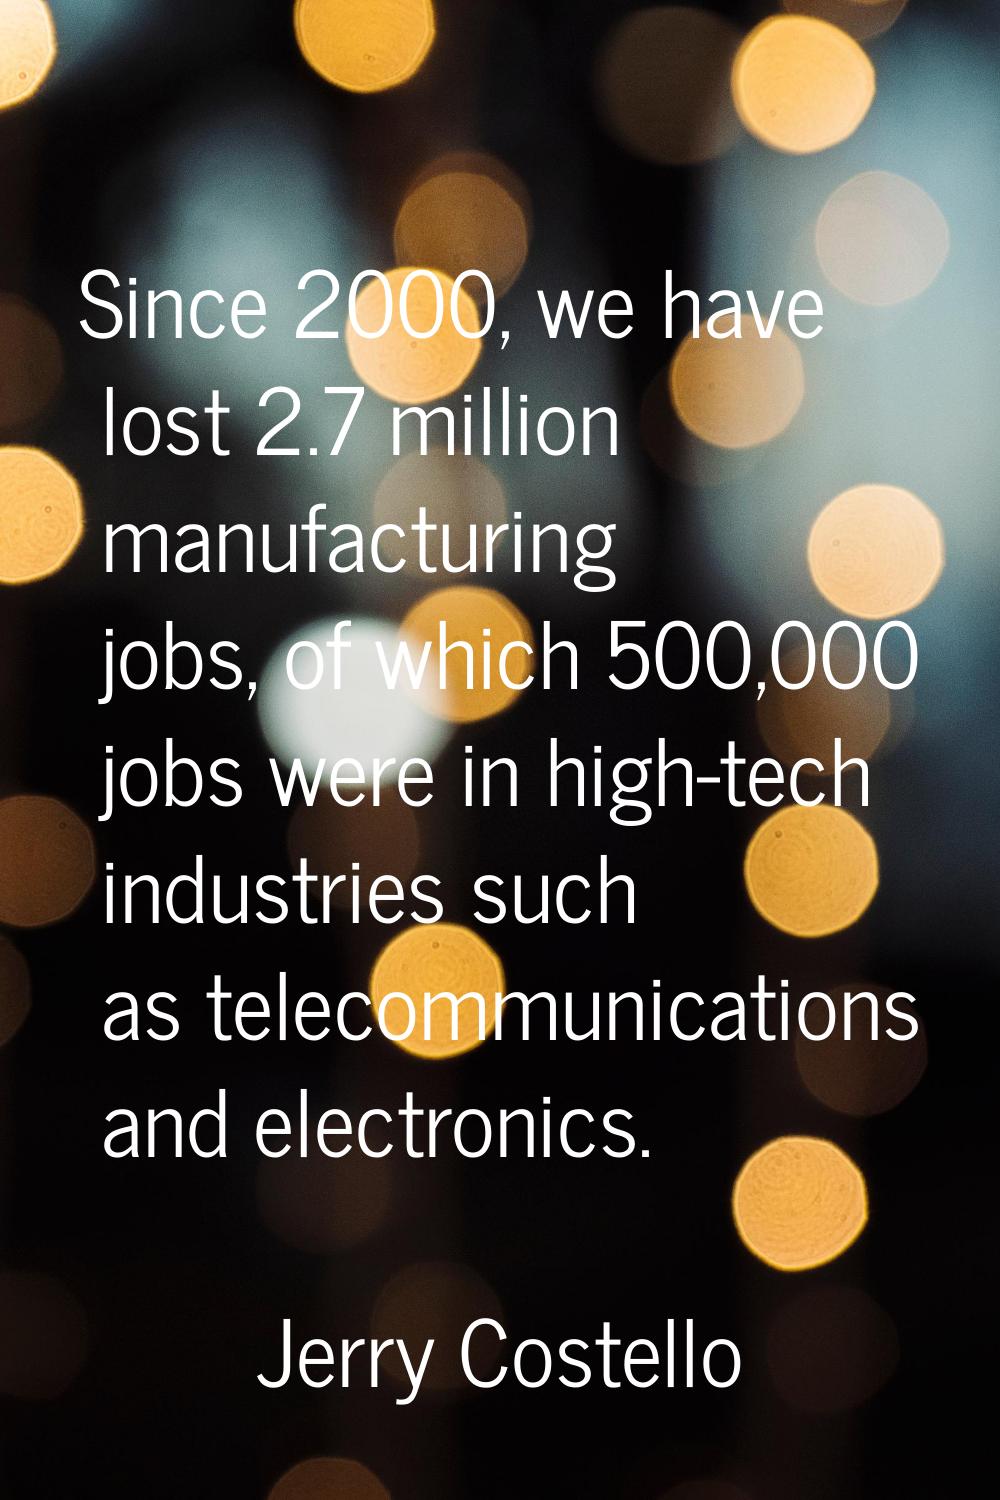 Since 2000, we have lost 2.7 million manufacturing jobs, of which 500,000 jobs were in high-tech in